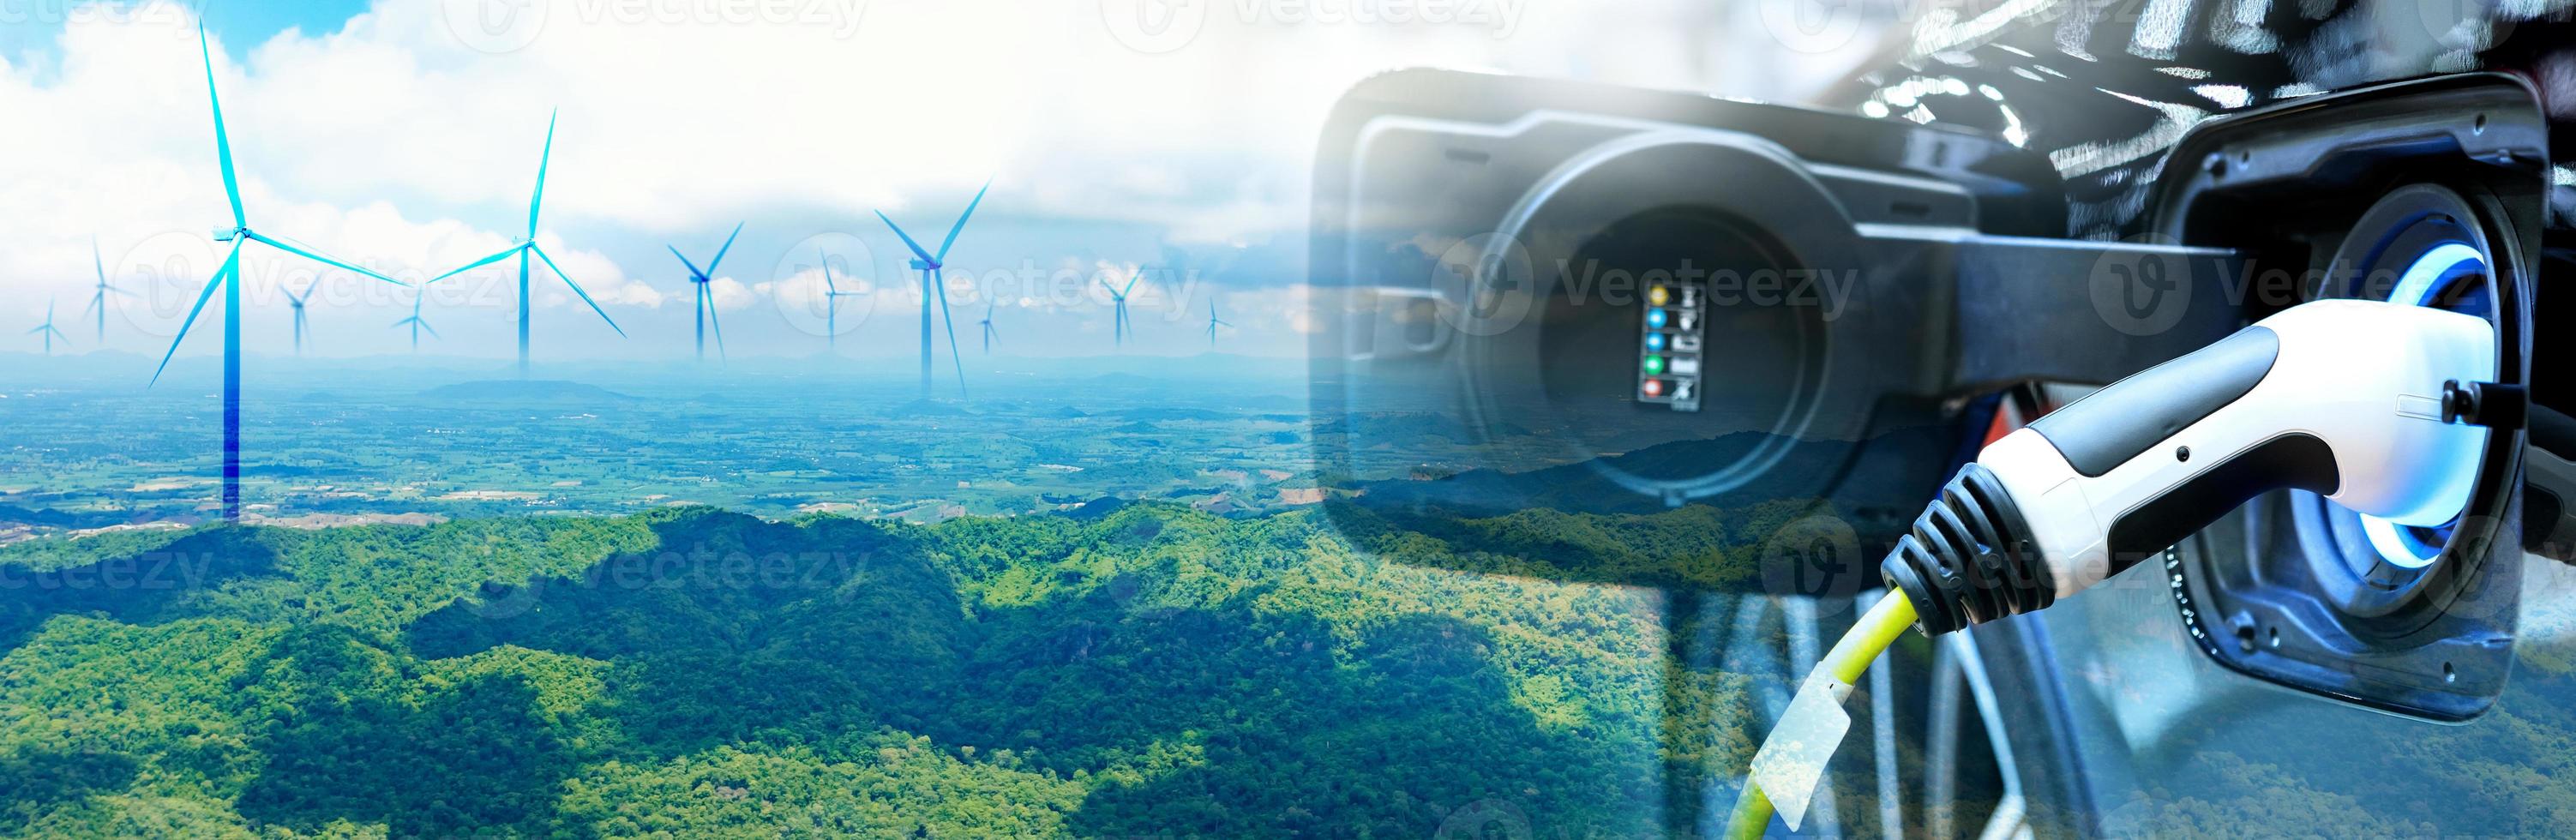 Charge EV car vehicle electric battery on station with wind turbine blue sky on panoramic background. Idea nature electric energy technology green eco car environment friendly concept. Double exposure photo